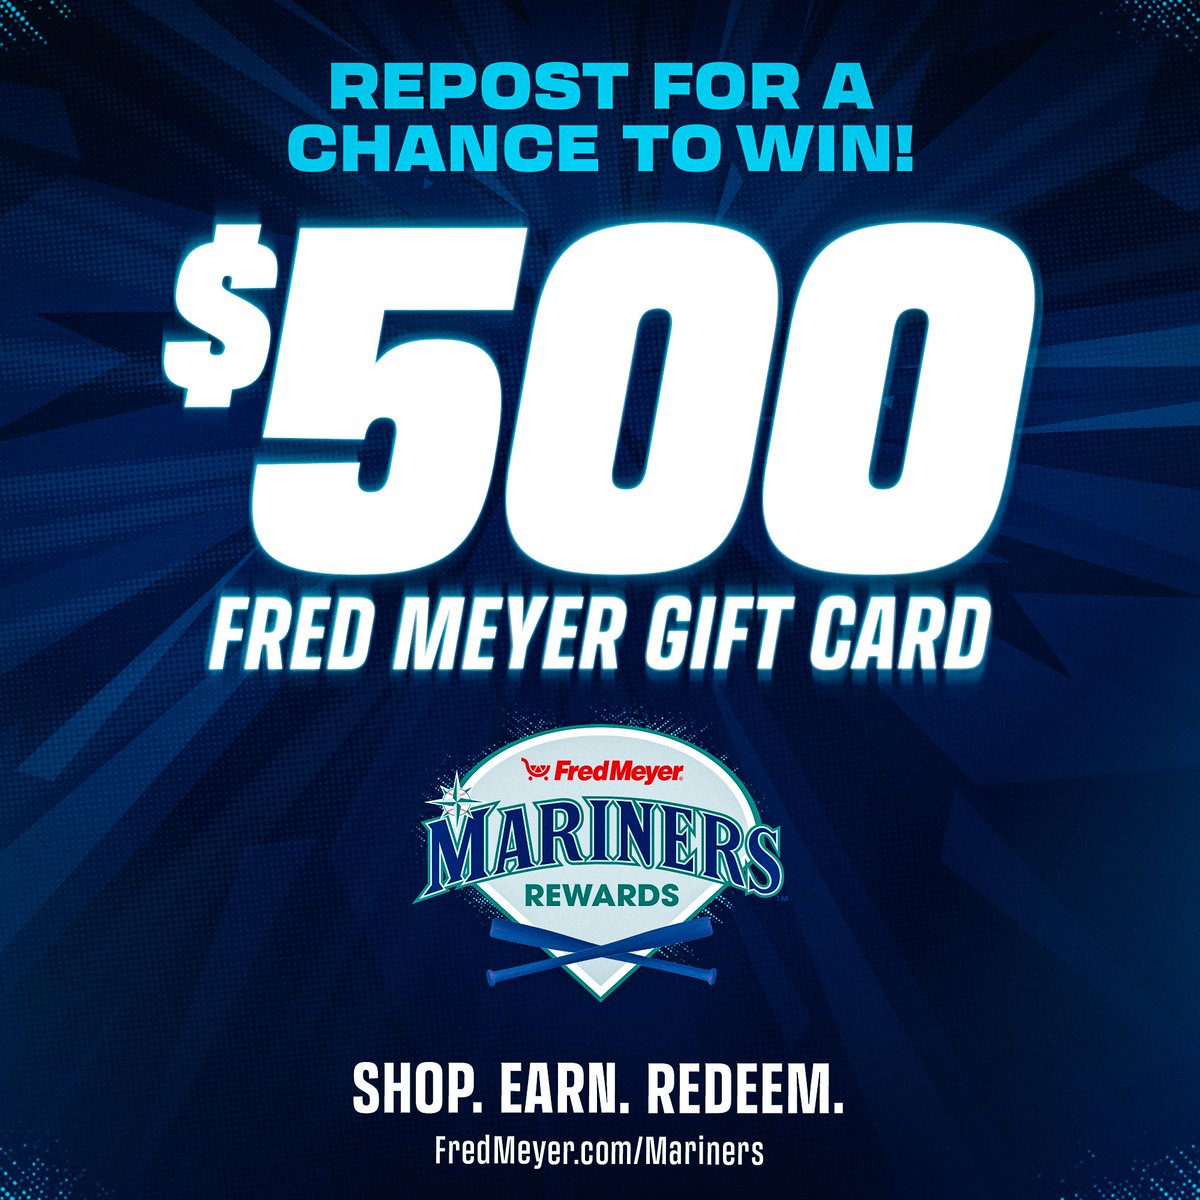 🛒 REPOST TO WIN 🛒 Just hit that repost button for a chance to win a @Fred_Meyer $500 gift card, and don’t forget to take advantage of the Fred Meyer Mariners Rewards Program the next time you shop.